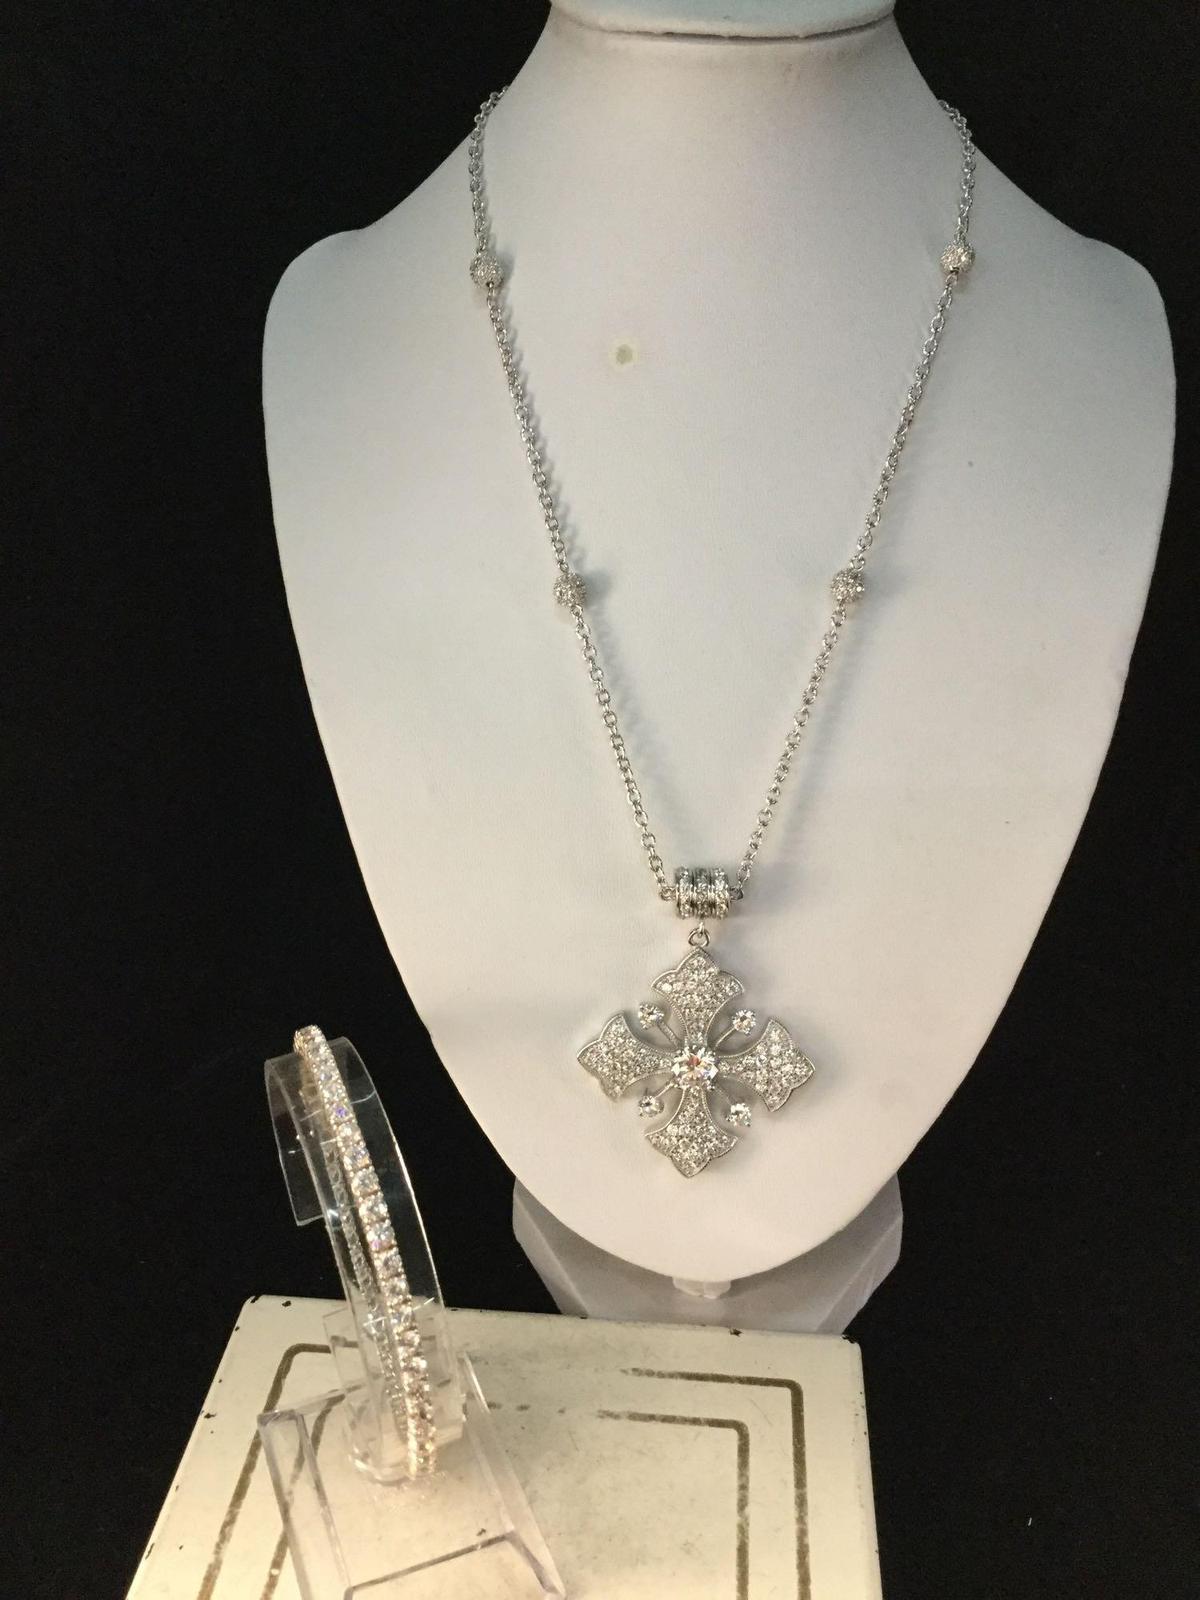 Amazing sterling silver necklace w/ cross pendant and silver bracelet filled w/ CZ?s